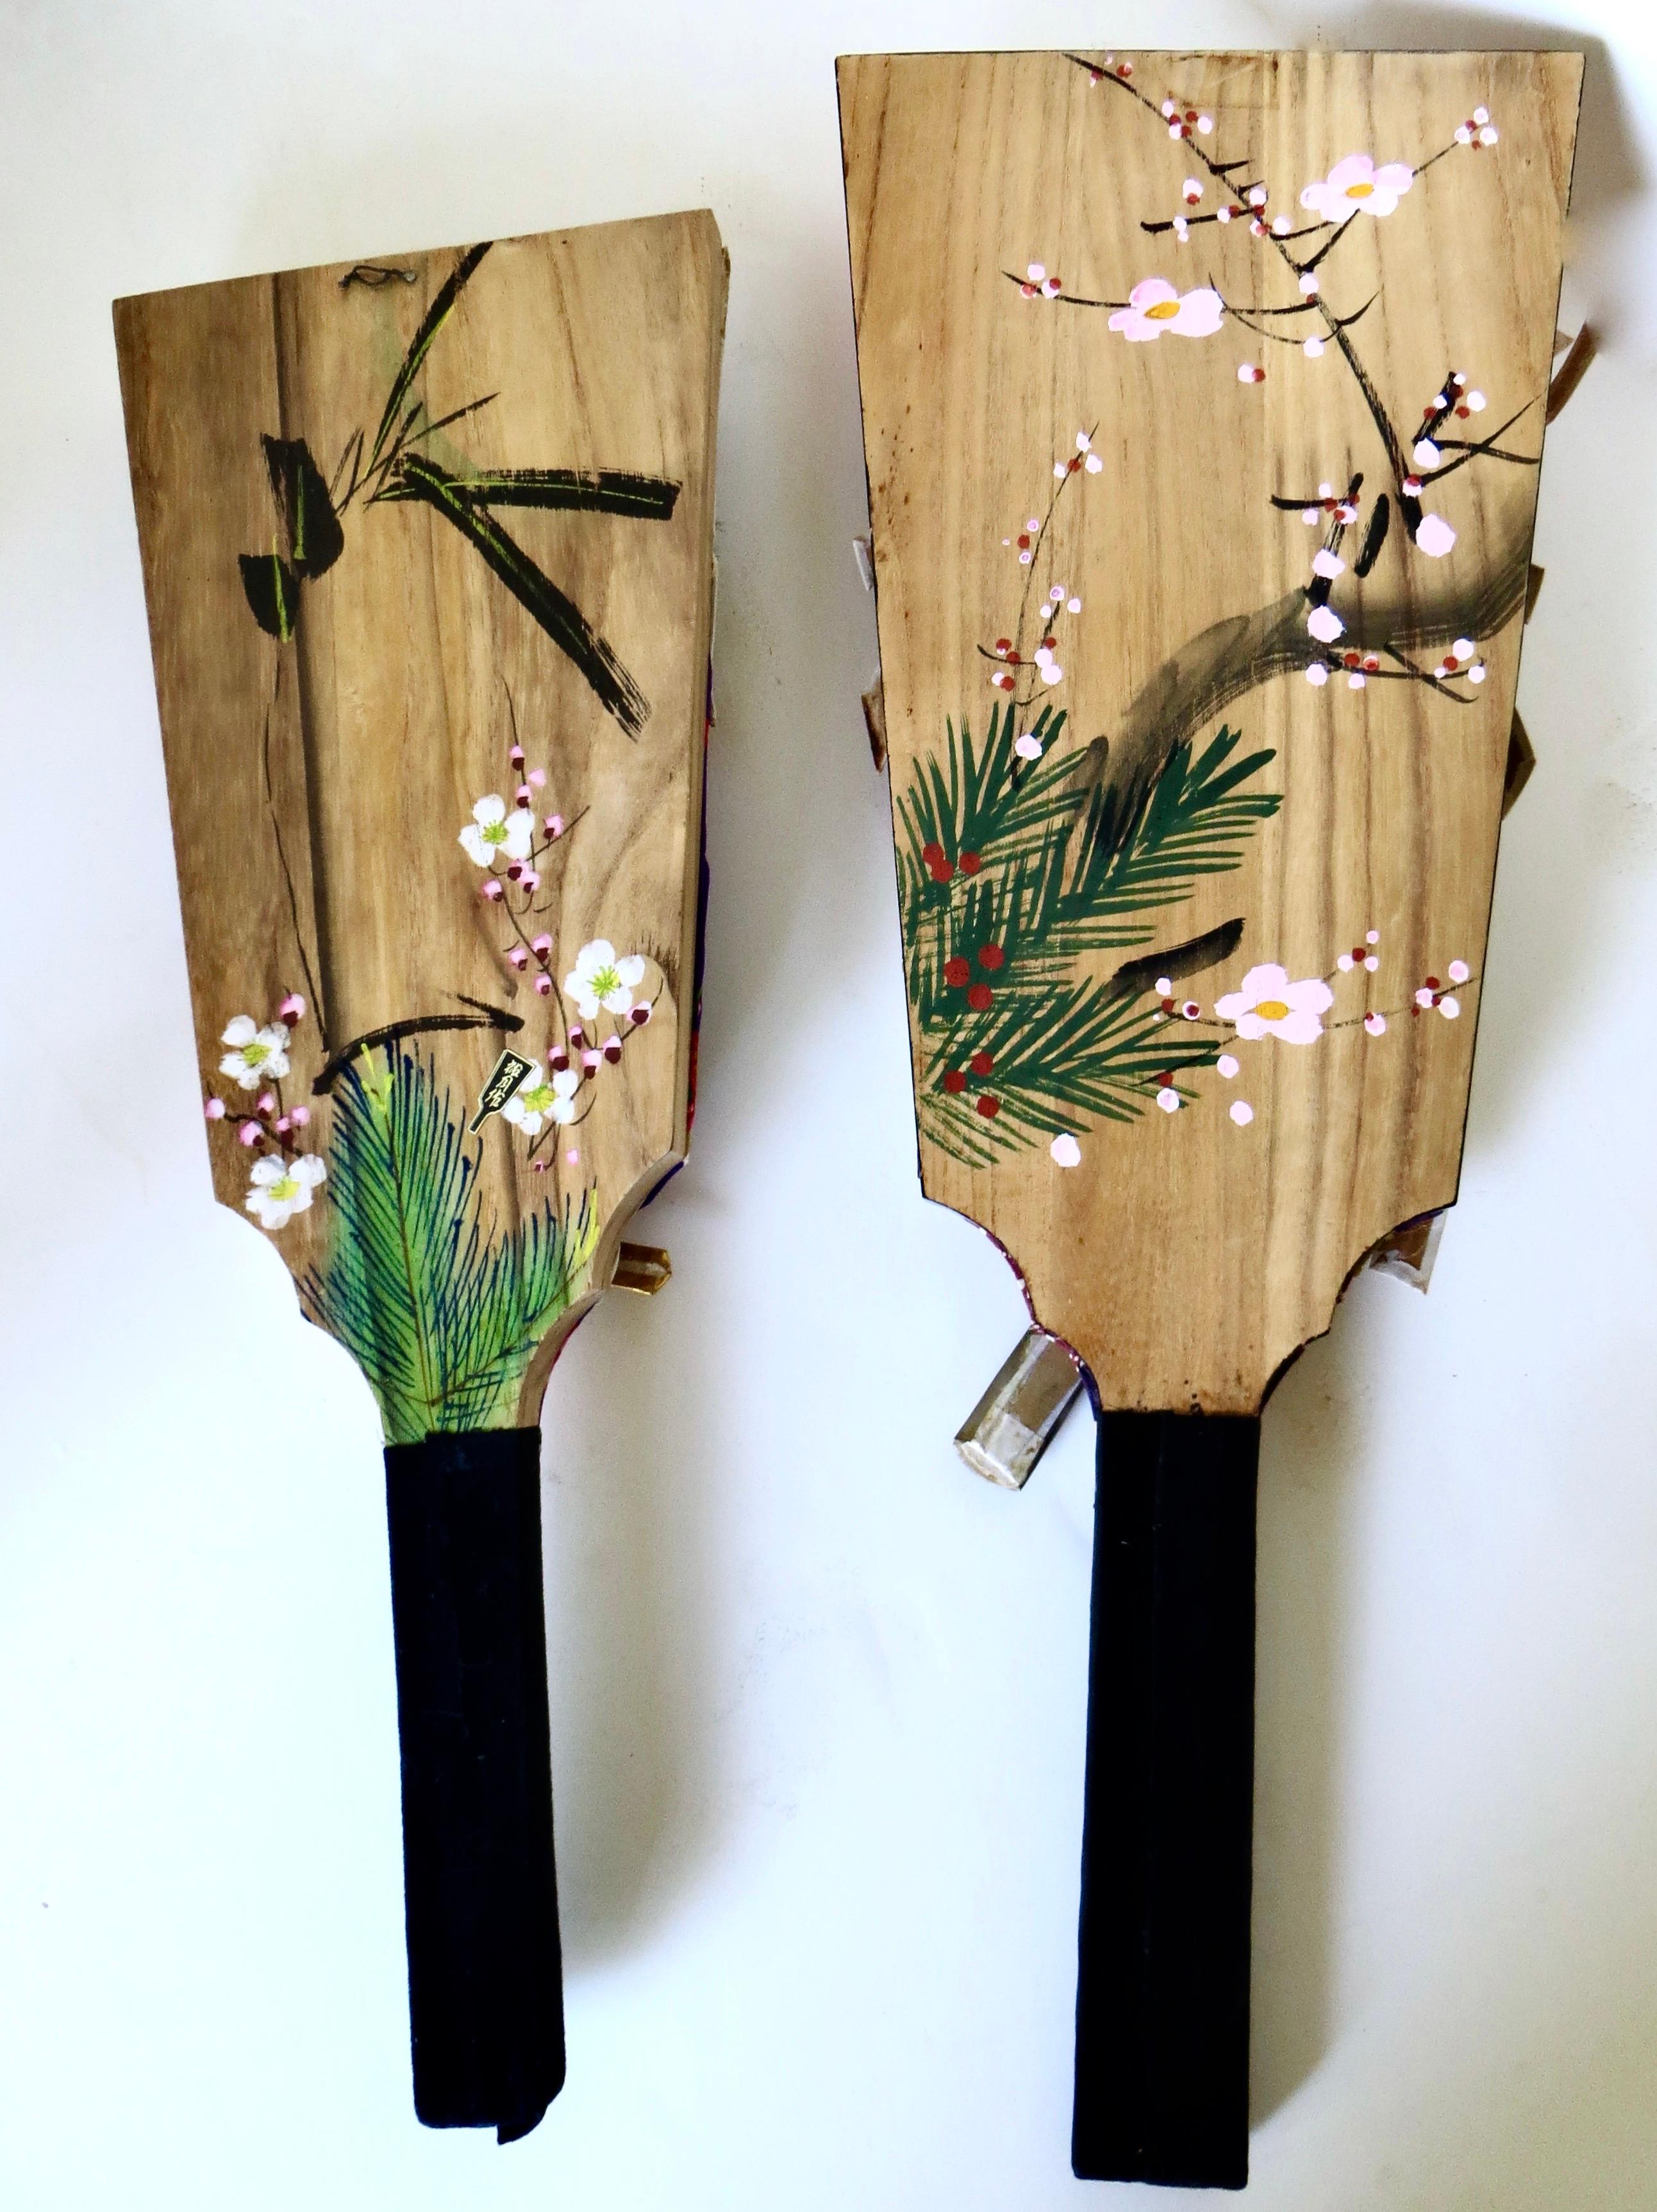 Offered are a pair of post war Japanese Kabuki paddles circa 1960, featuring a male and female Kabuki character actors in full traditional Japanese regalia with weapon mounts in hand. Material is fabric (probably cotton) on wood with hand painted